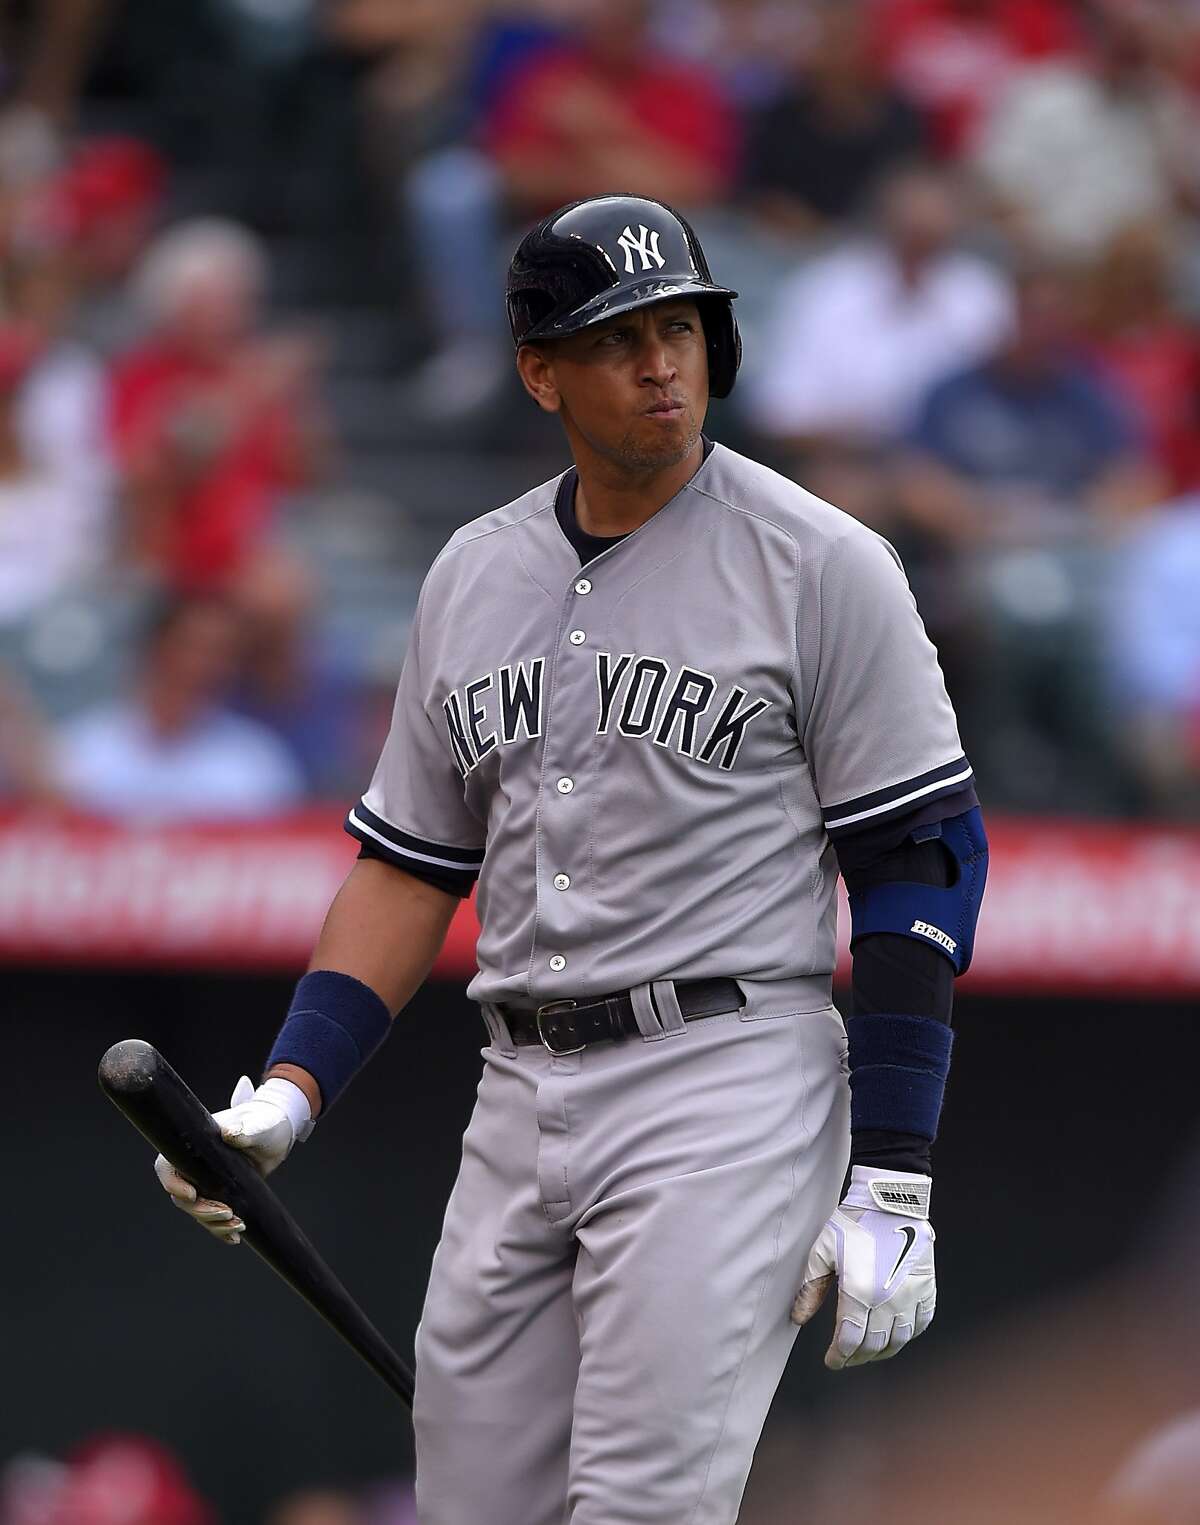 New York Yankees' Alex Rodriguez walks back to the dugout ofter striking out during a baseball game against the Los Angeles Angels, Wednesday, July 1, 2015, in Anaheim, Calif. (AP Photo/Mark J. Terrill)